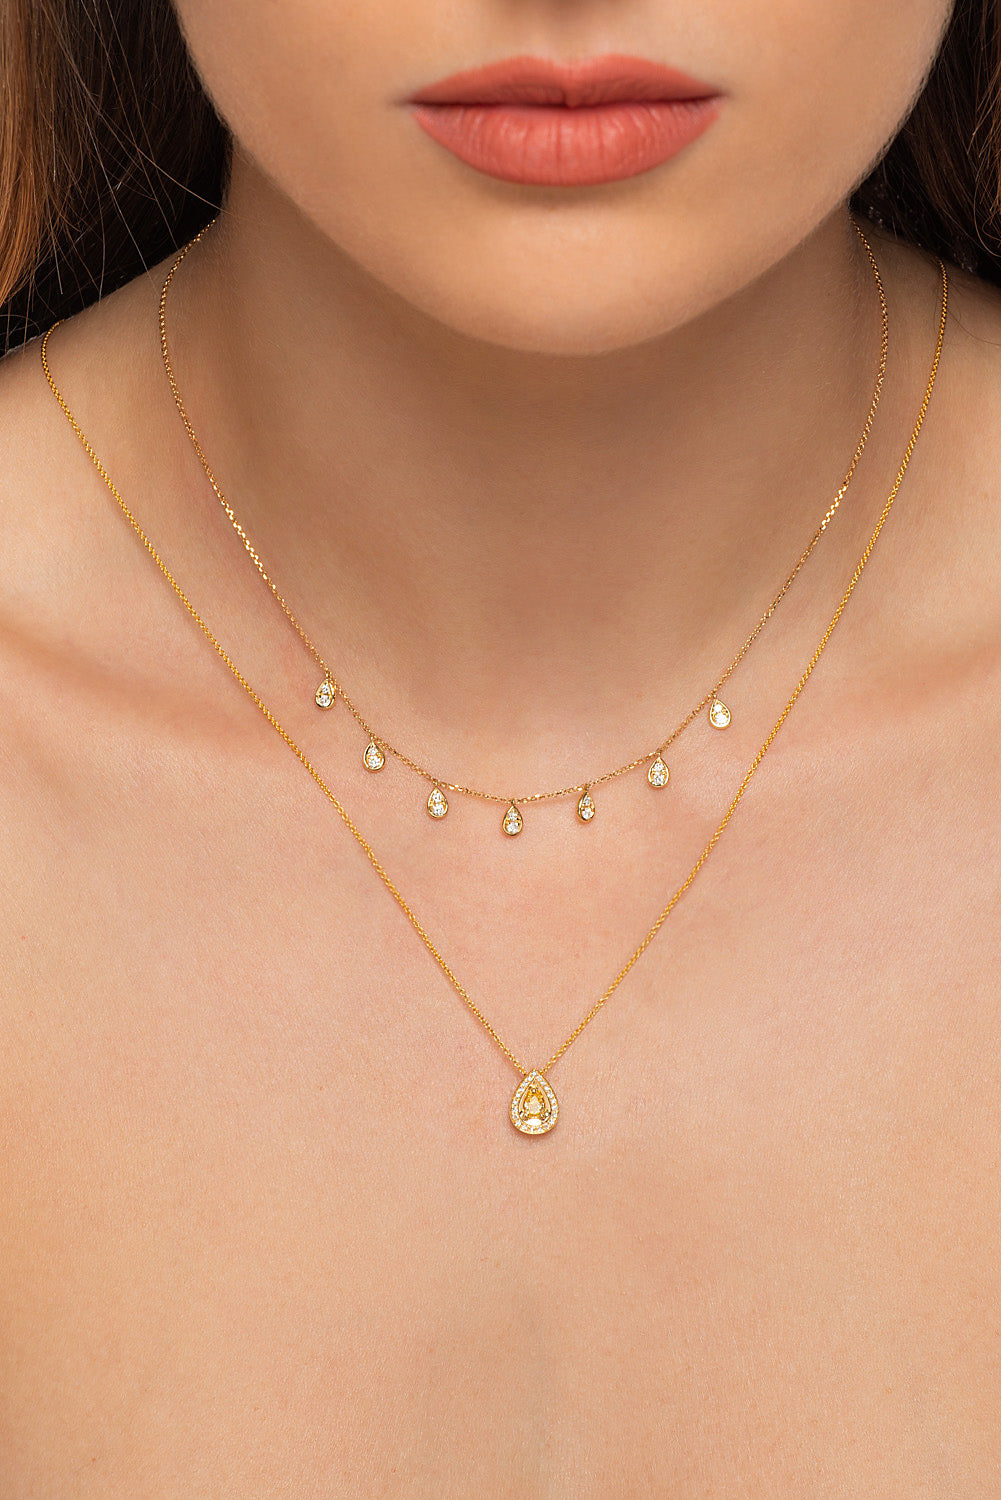 Gold and diamond necklace. Anatol necklace. Diamond necklace. Κολιέ χρυσό. Κολιέ με μπριγιάν. Κολιέ με διαμάντια.